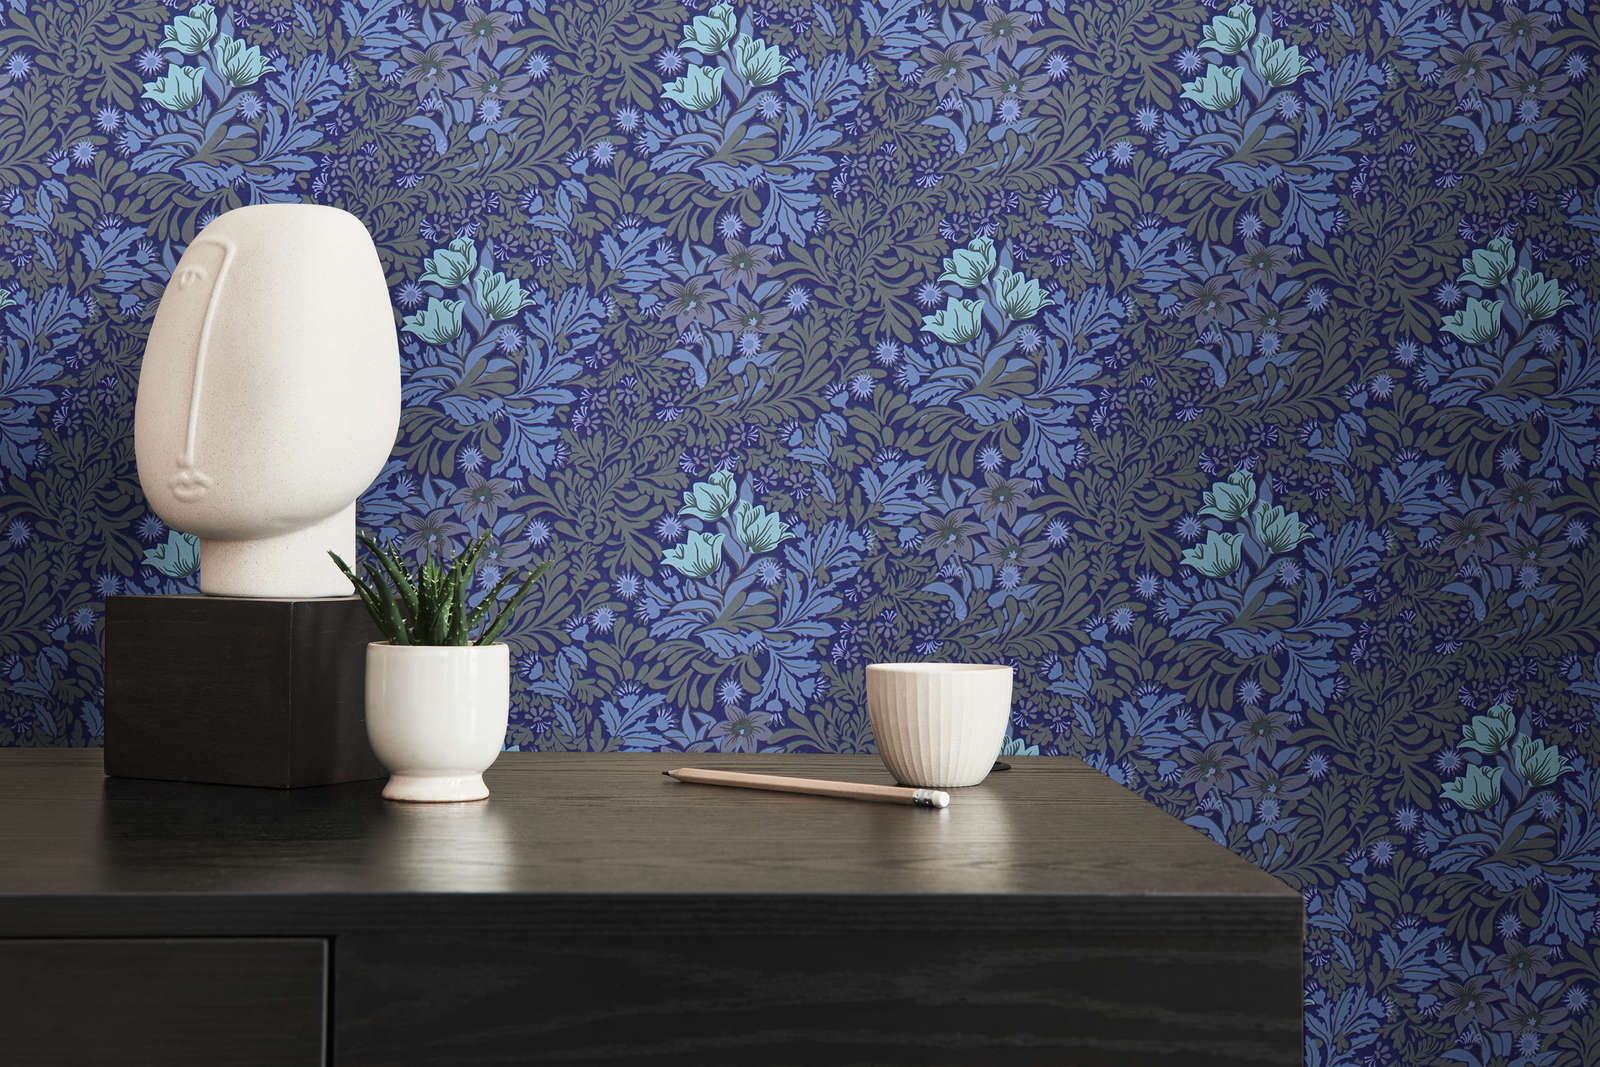             Floral non-woven wallpaper with leaf tendrils and flowers - blue, grey, green
        